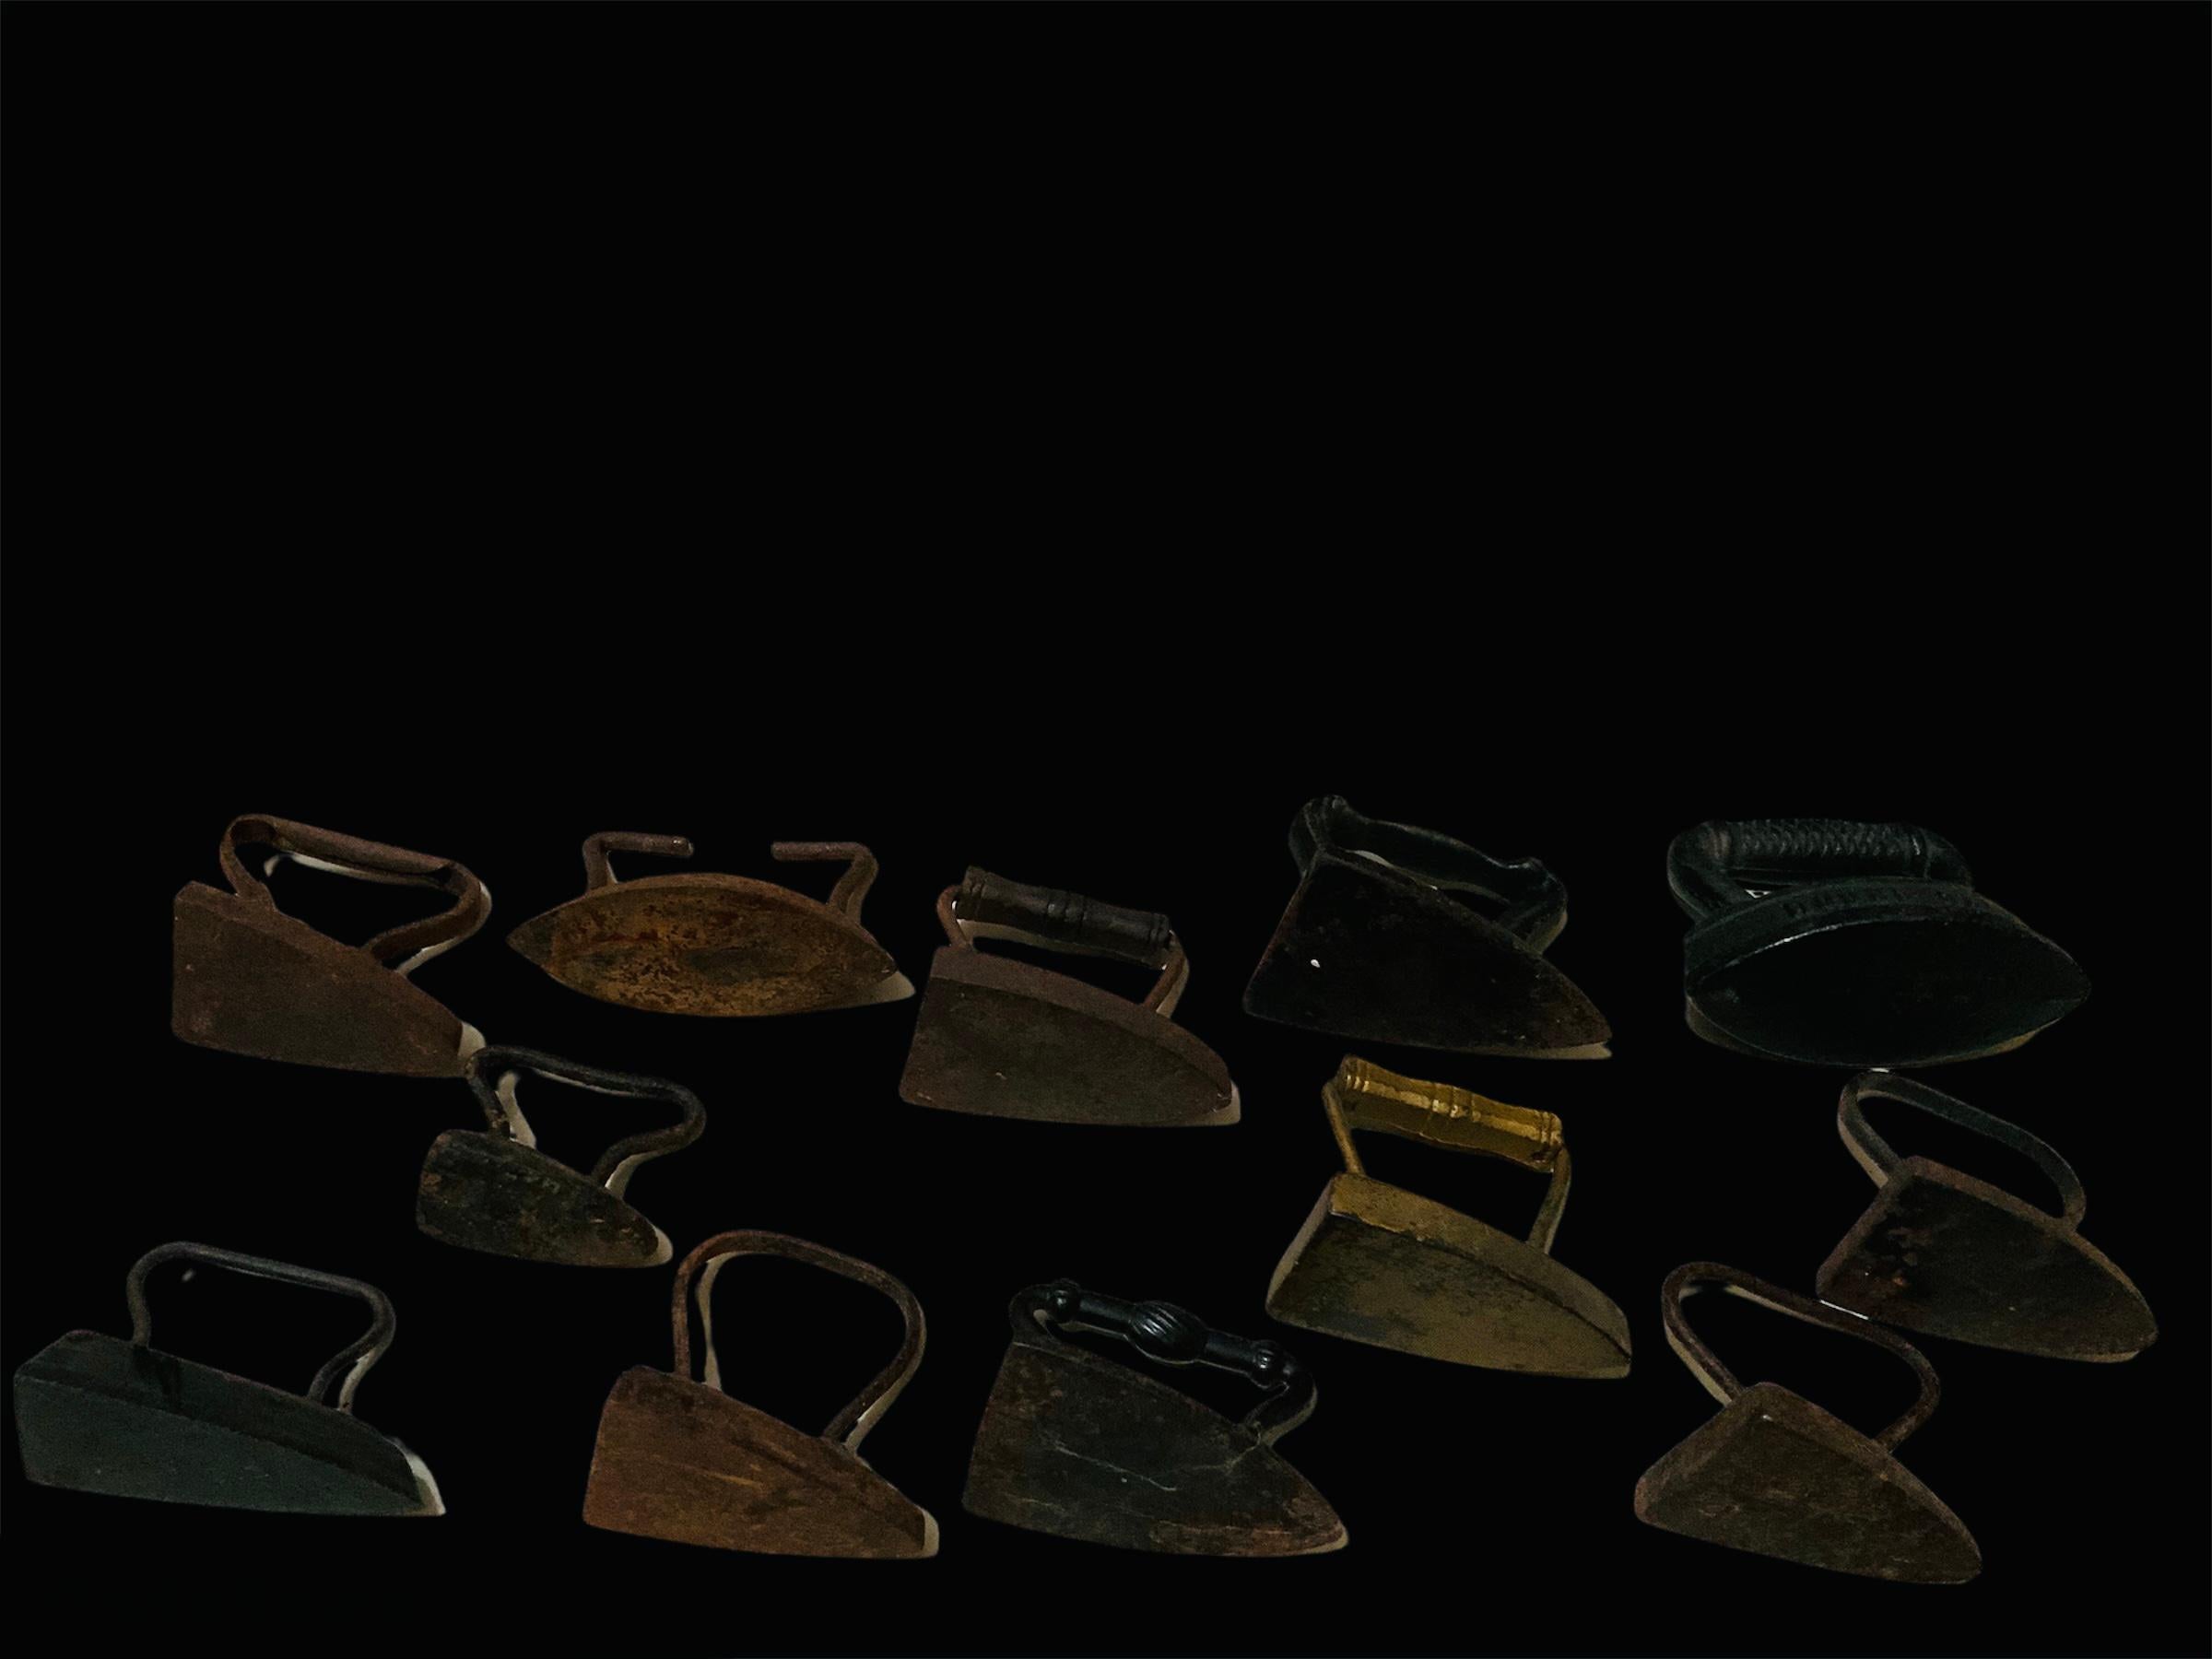 This is a collection of twelve antique miniatures sad irons/flat cast irons. Some of them are identified by numbers ( 0, 1 and 2). Another ones are hallmarked Dover, USA and Stoves and Ranges. There is one that has a symbol of a heart in the center.